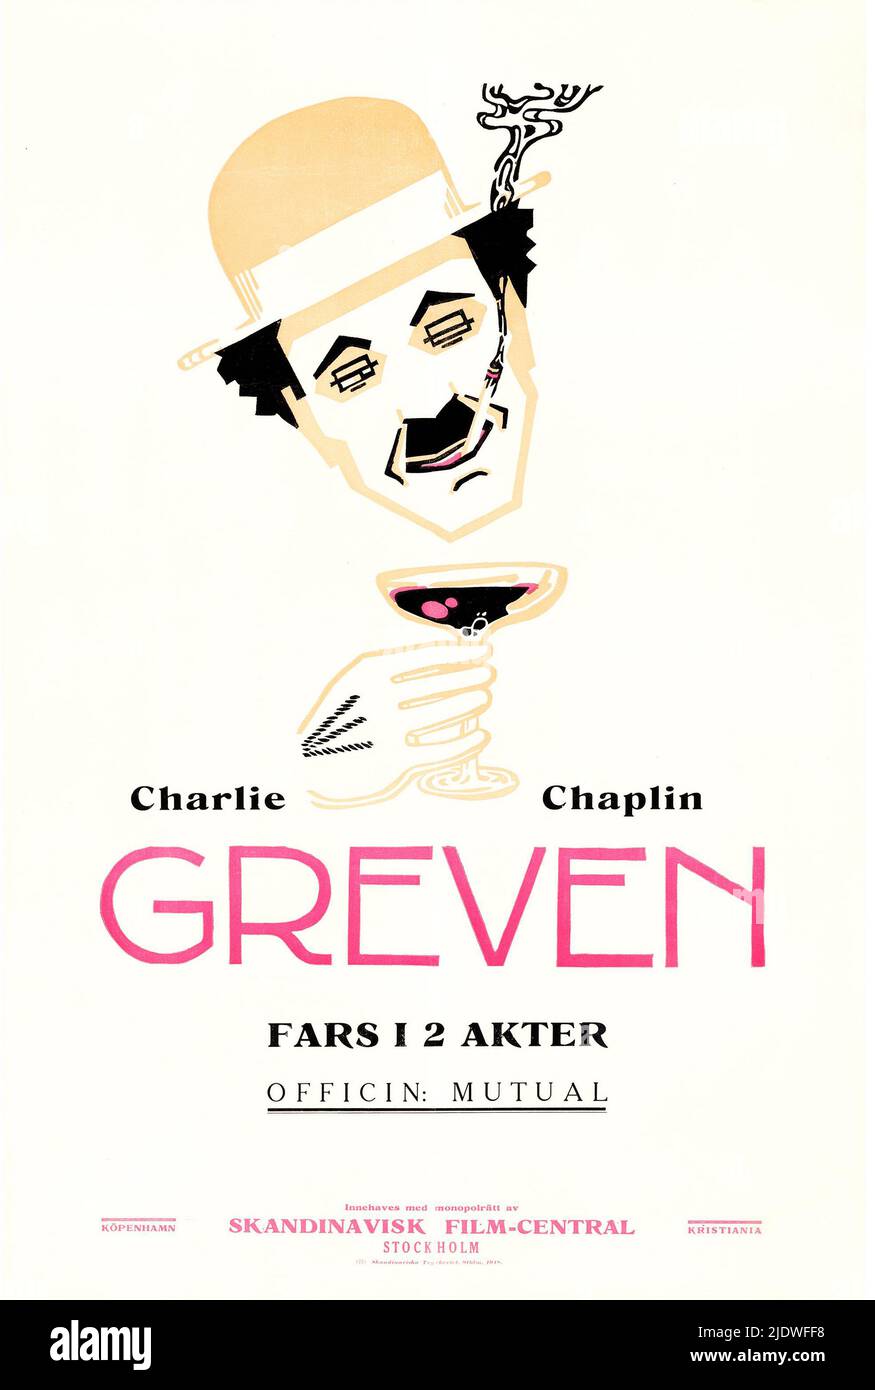 Vintage swedish film poster: Greven - Charlie Chaplin in The Count (Mutual, 1916). Swedish movie poster. Stock Photo